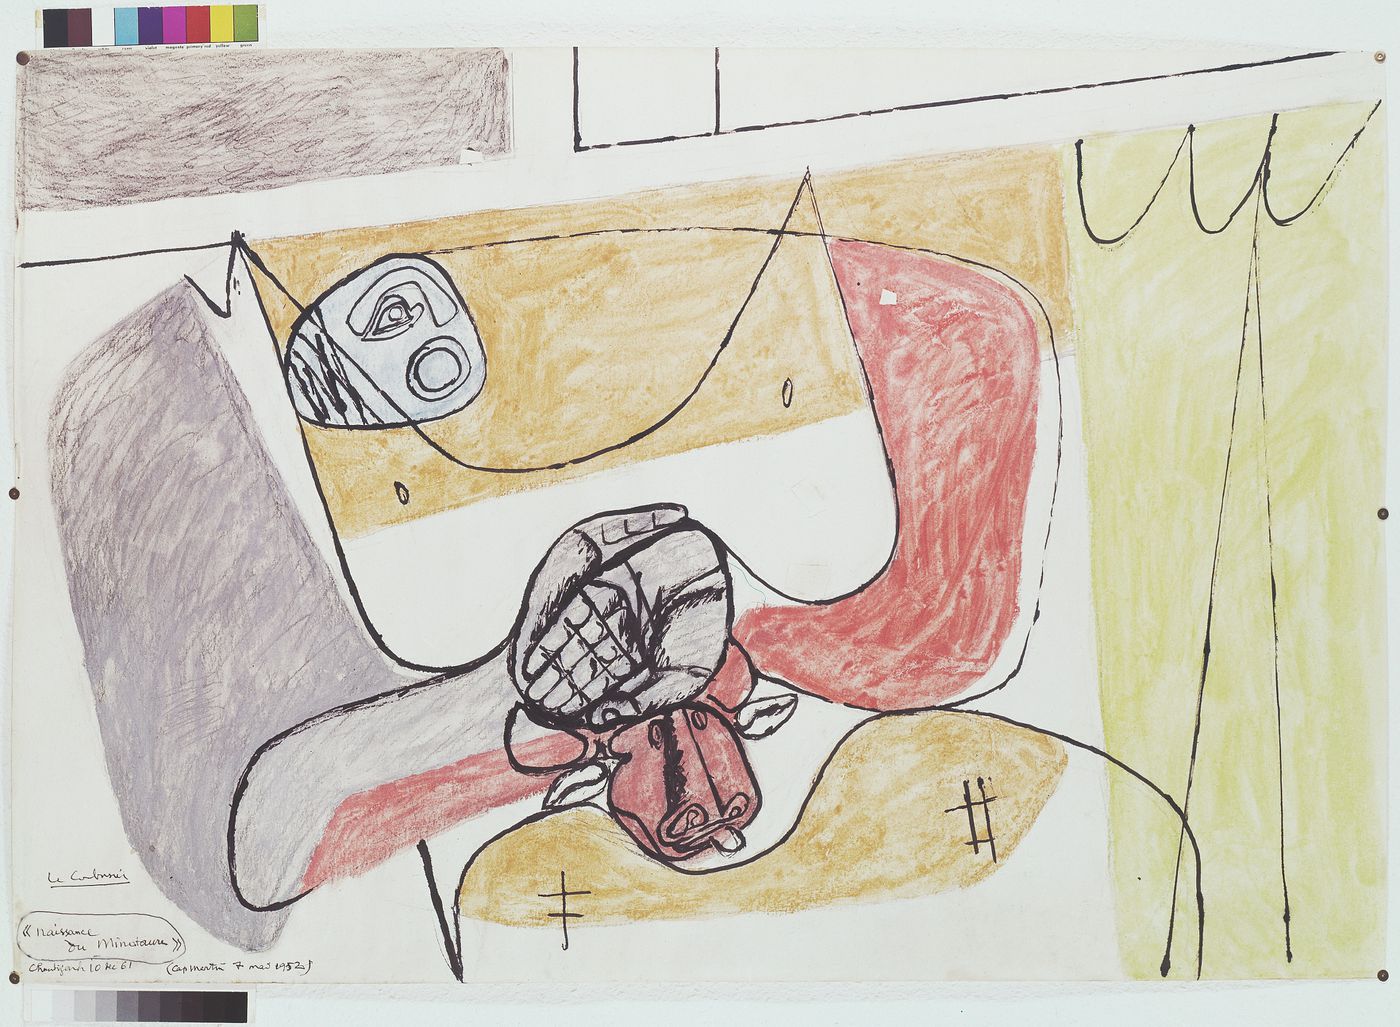 Photographs of a drawing by Le Corbusier